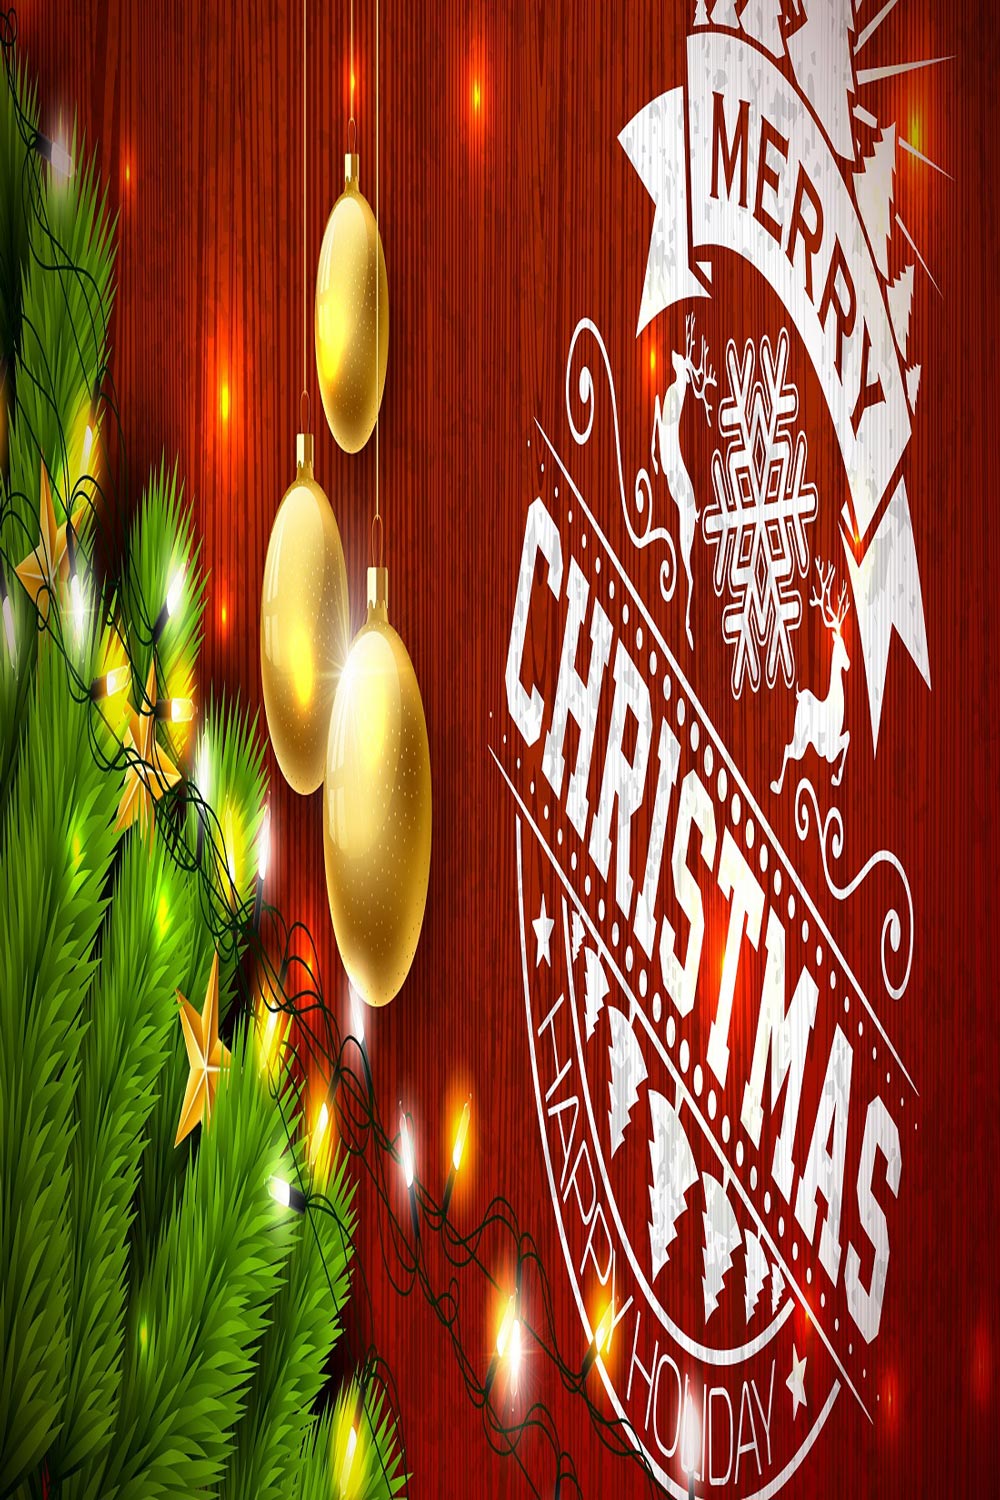 Merry Christmas happy new year design pinterest preview image.